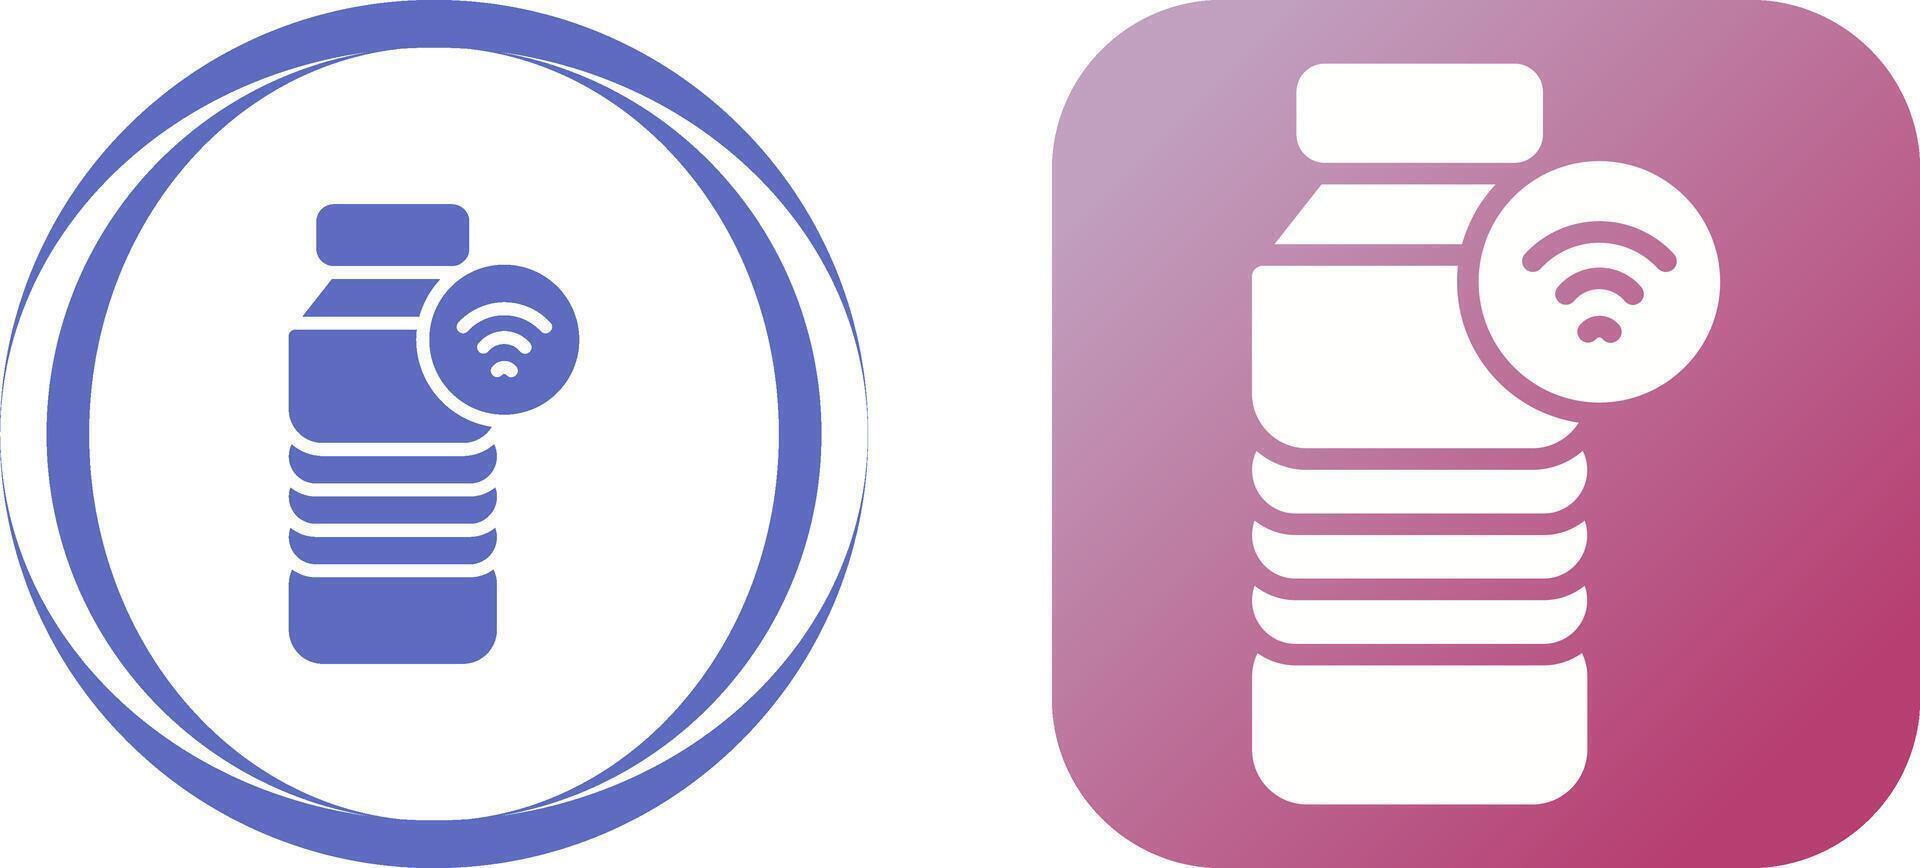 Fitness Smart Water Bottle Vector Icon